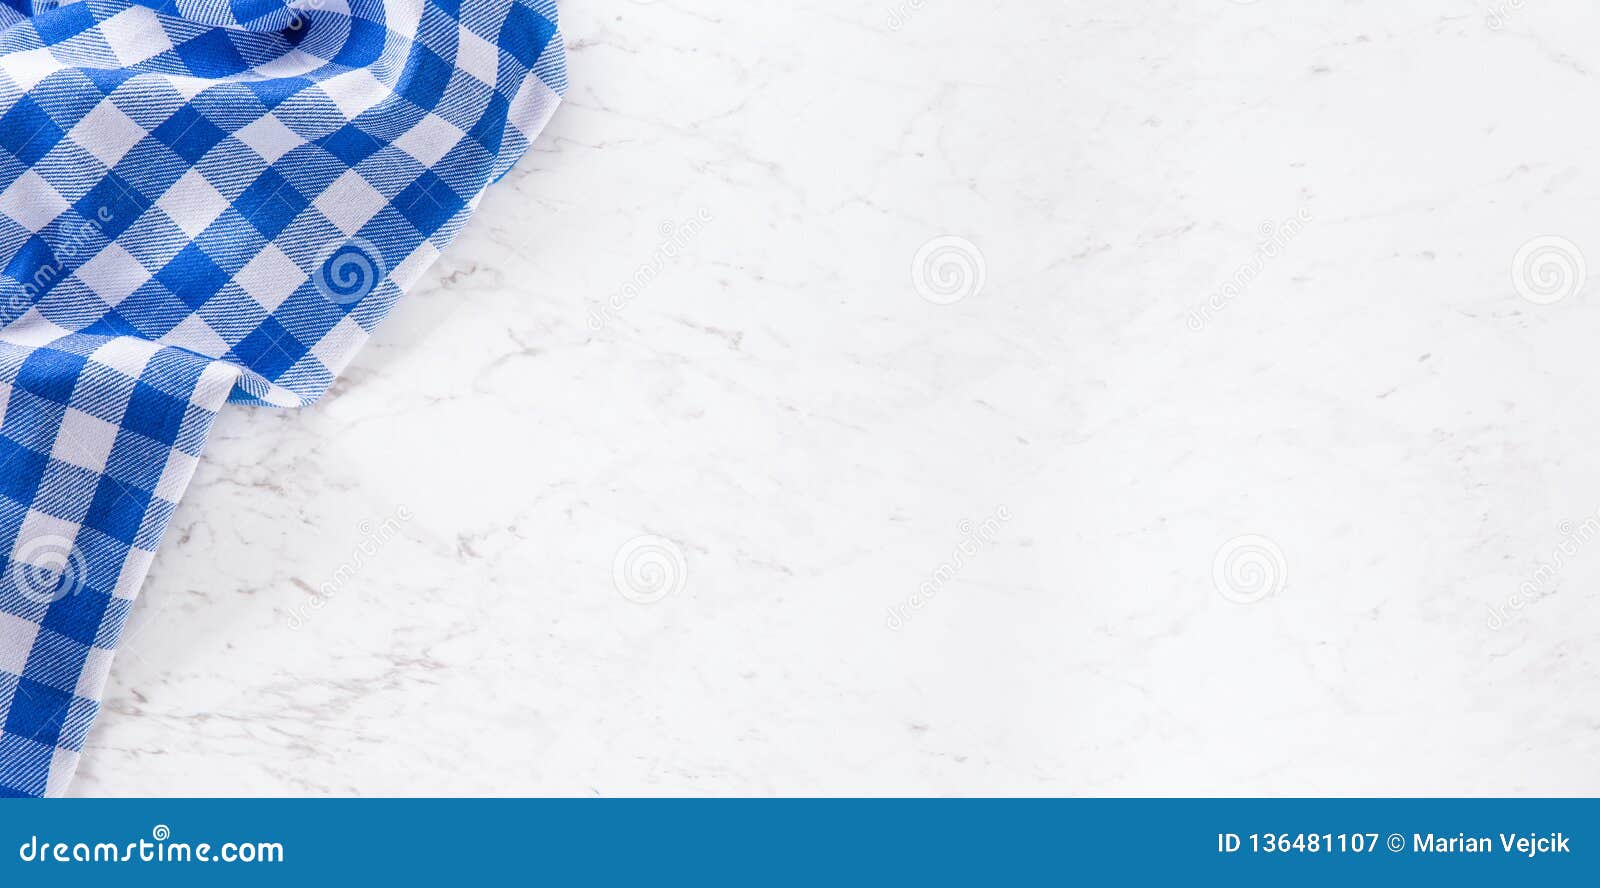 top of view blue checkered tablecloth on white marble table